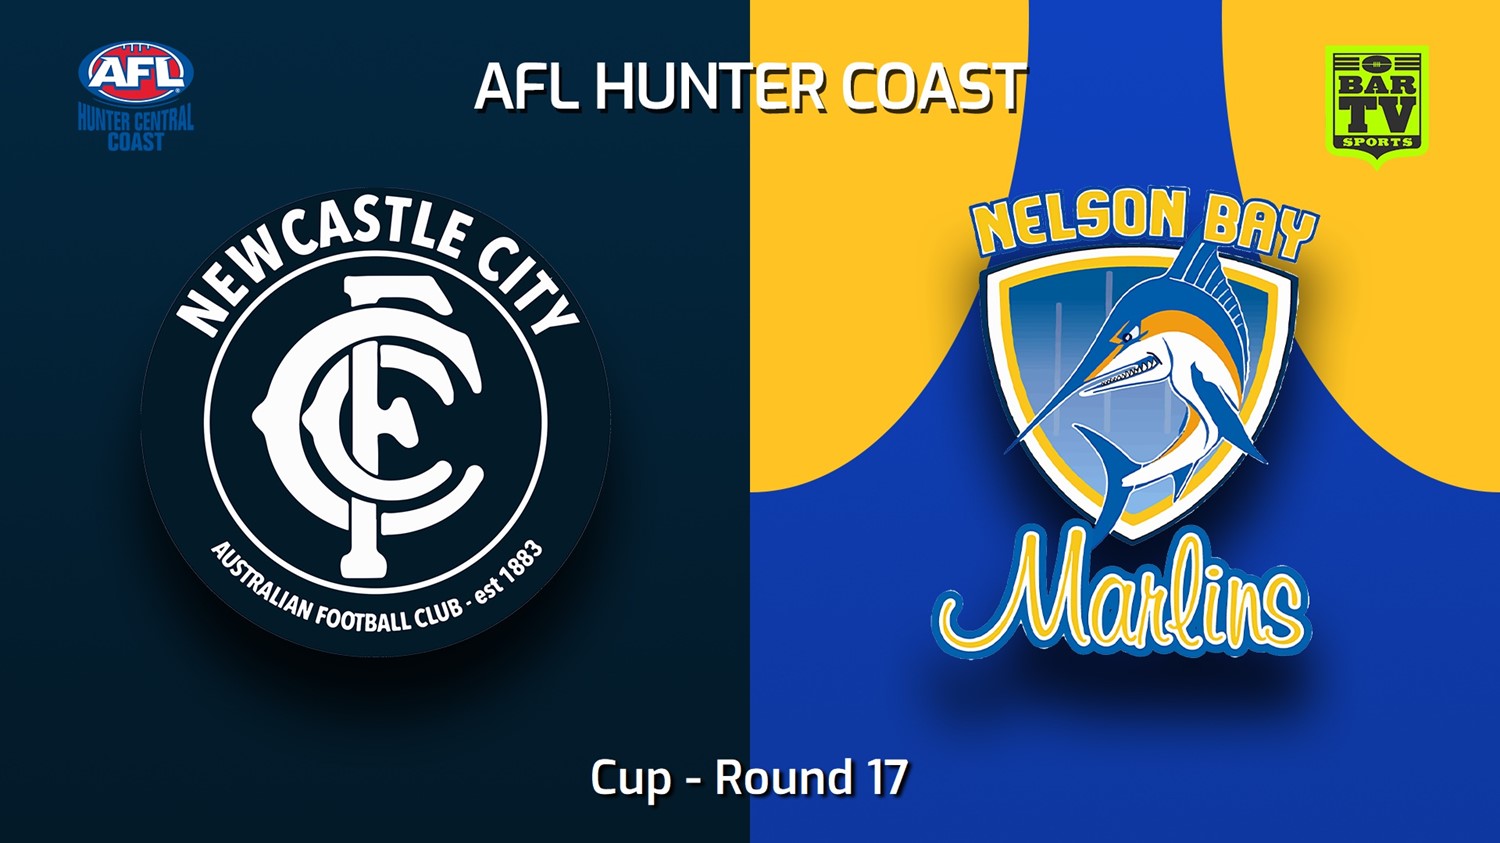 230812-AFL Hunter Central Coast Round 17 - Cup - Newcastle City  v Nelson Bay Marlins Minigame Slate Image